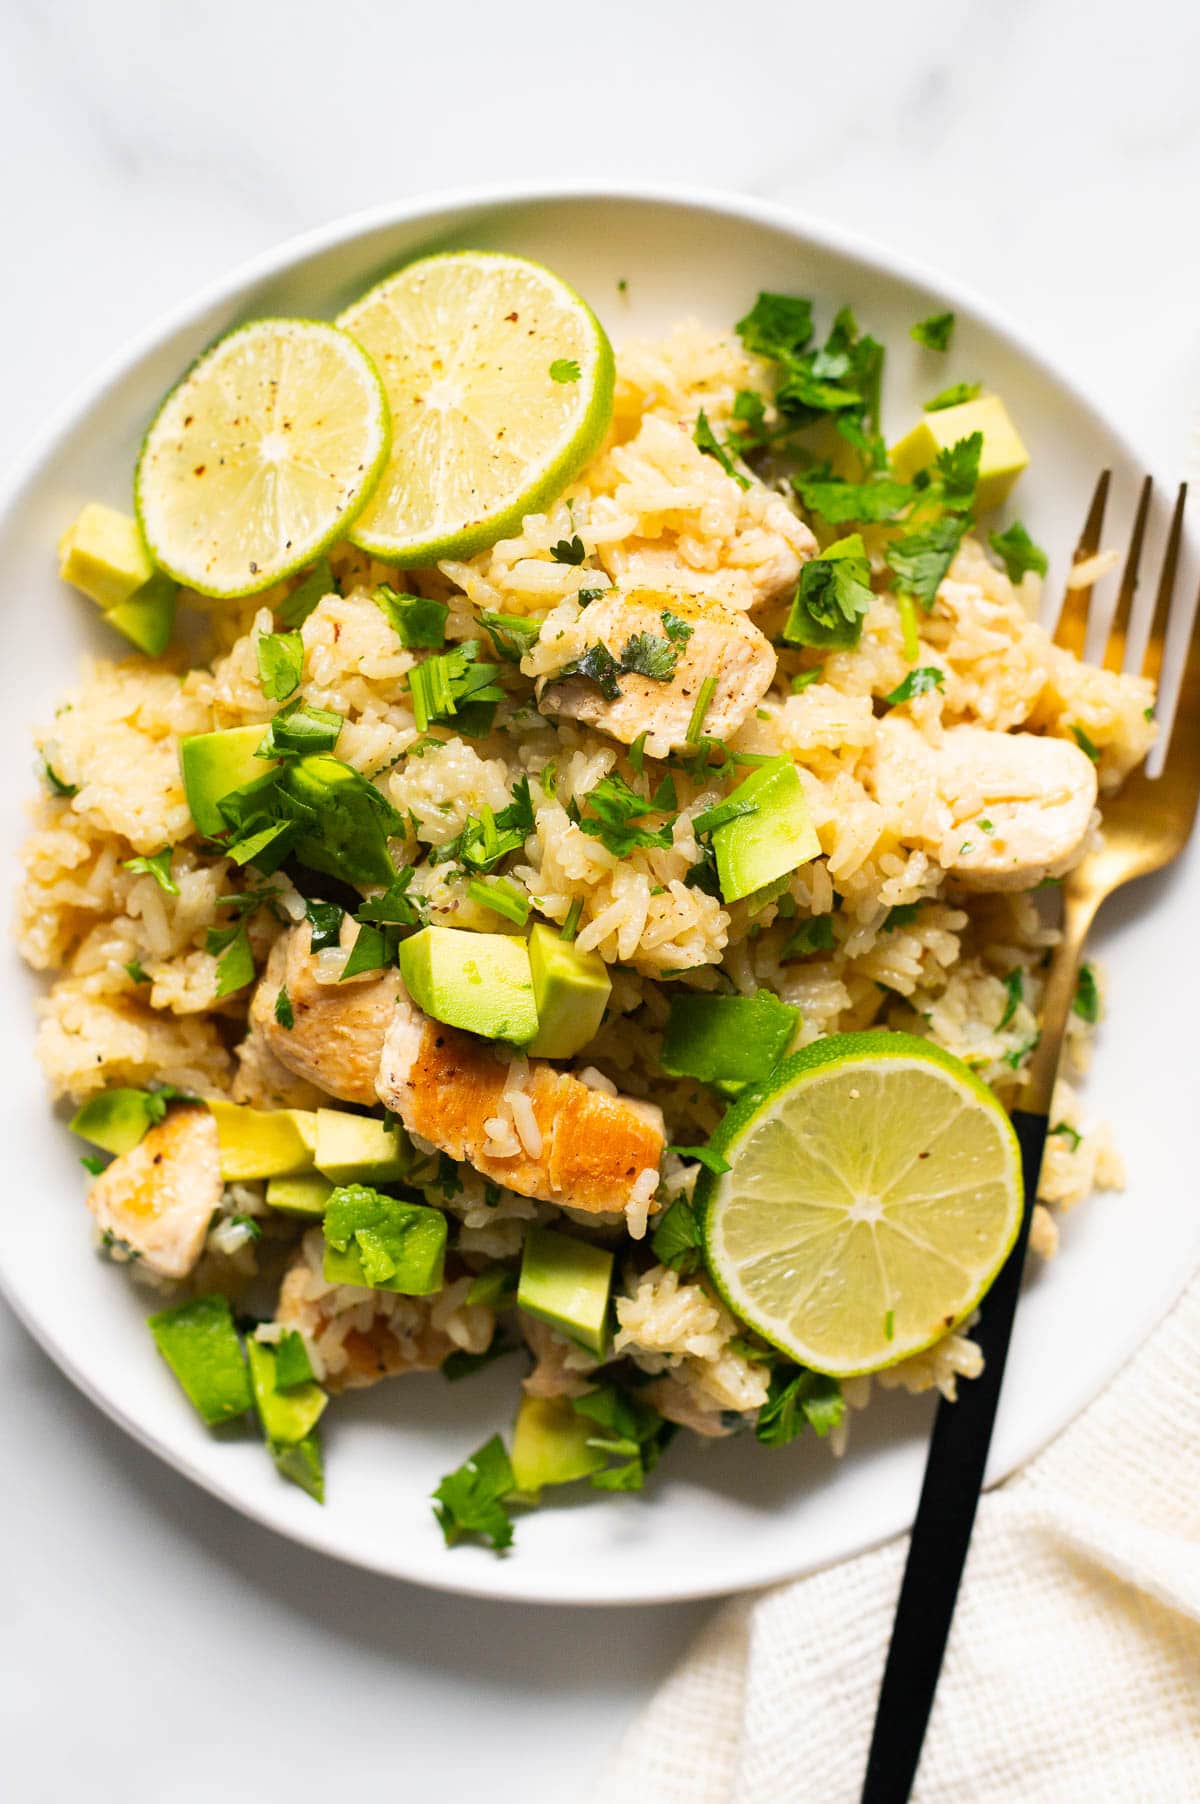 Chicken and rice topped with avocado and limes served on a plate with a fork.